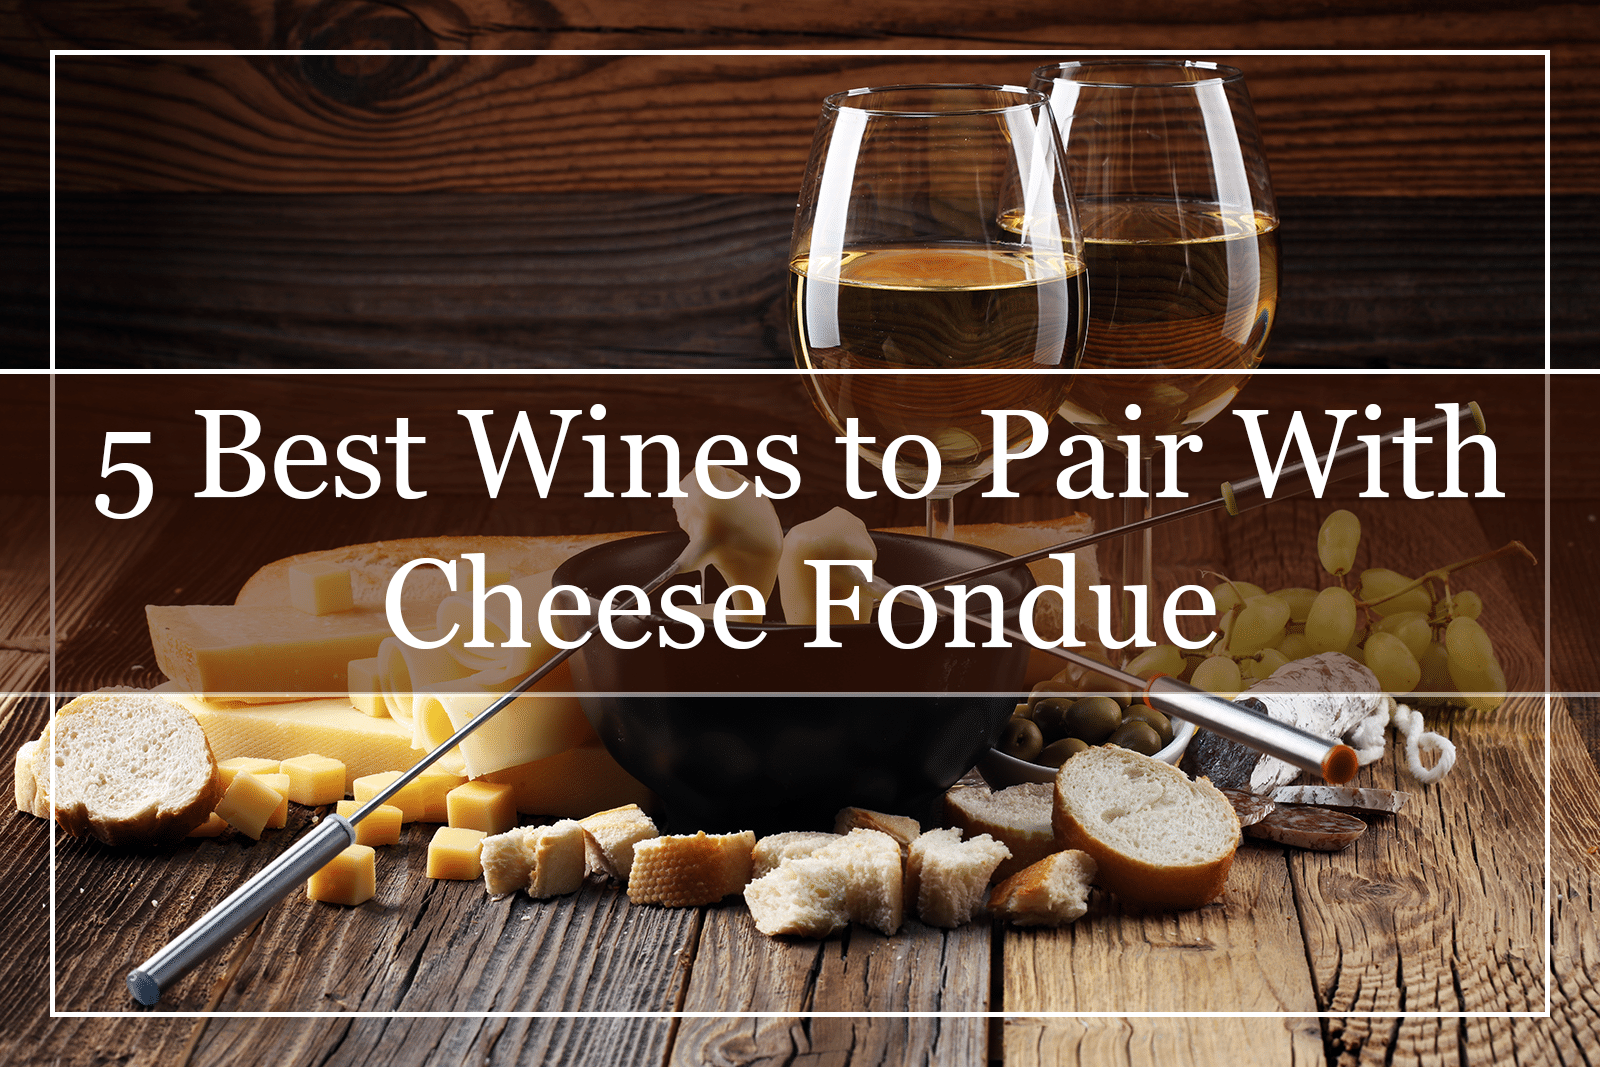 5 Best Wines to Pair With Cheese Fondue (2022)